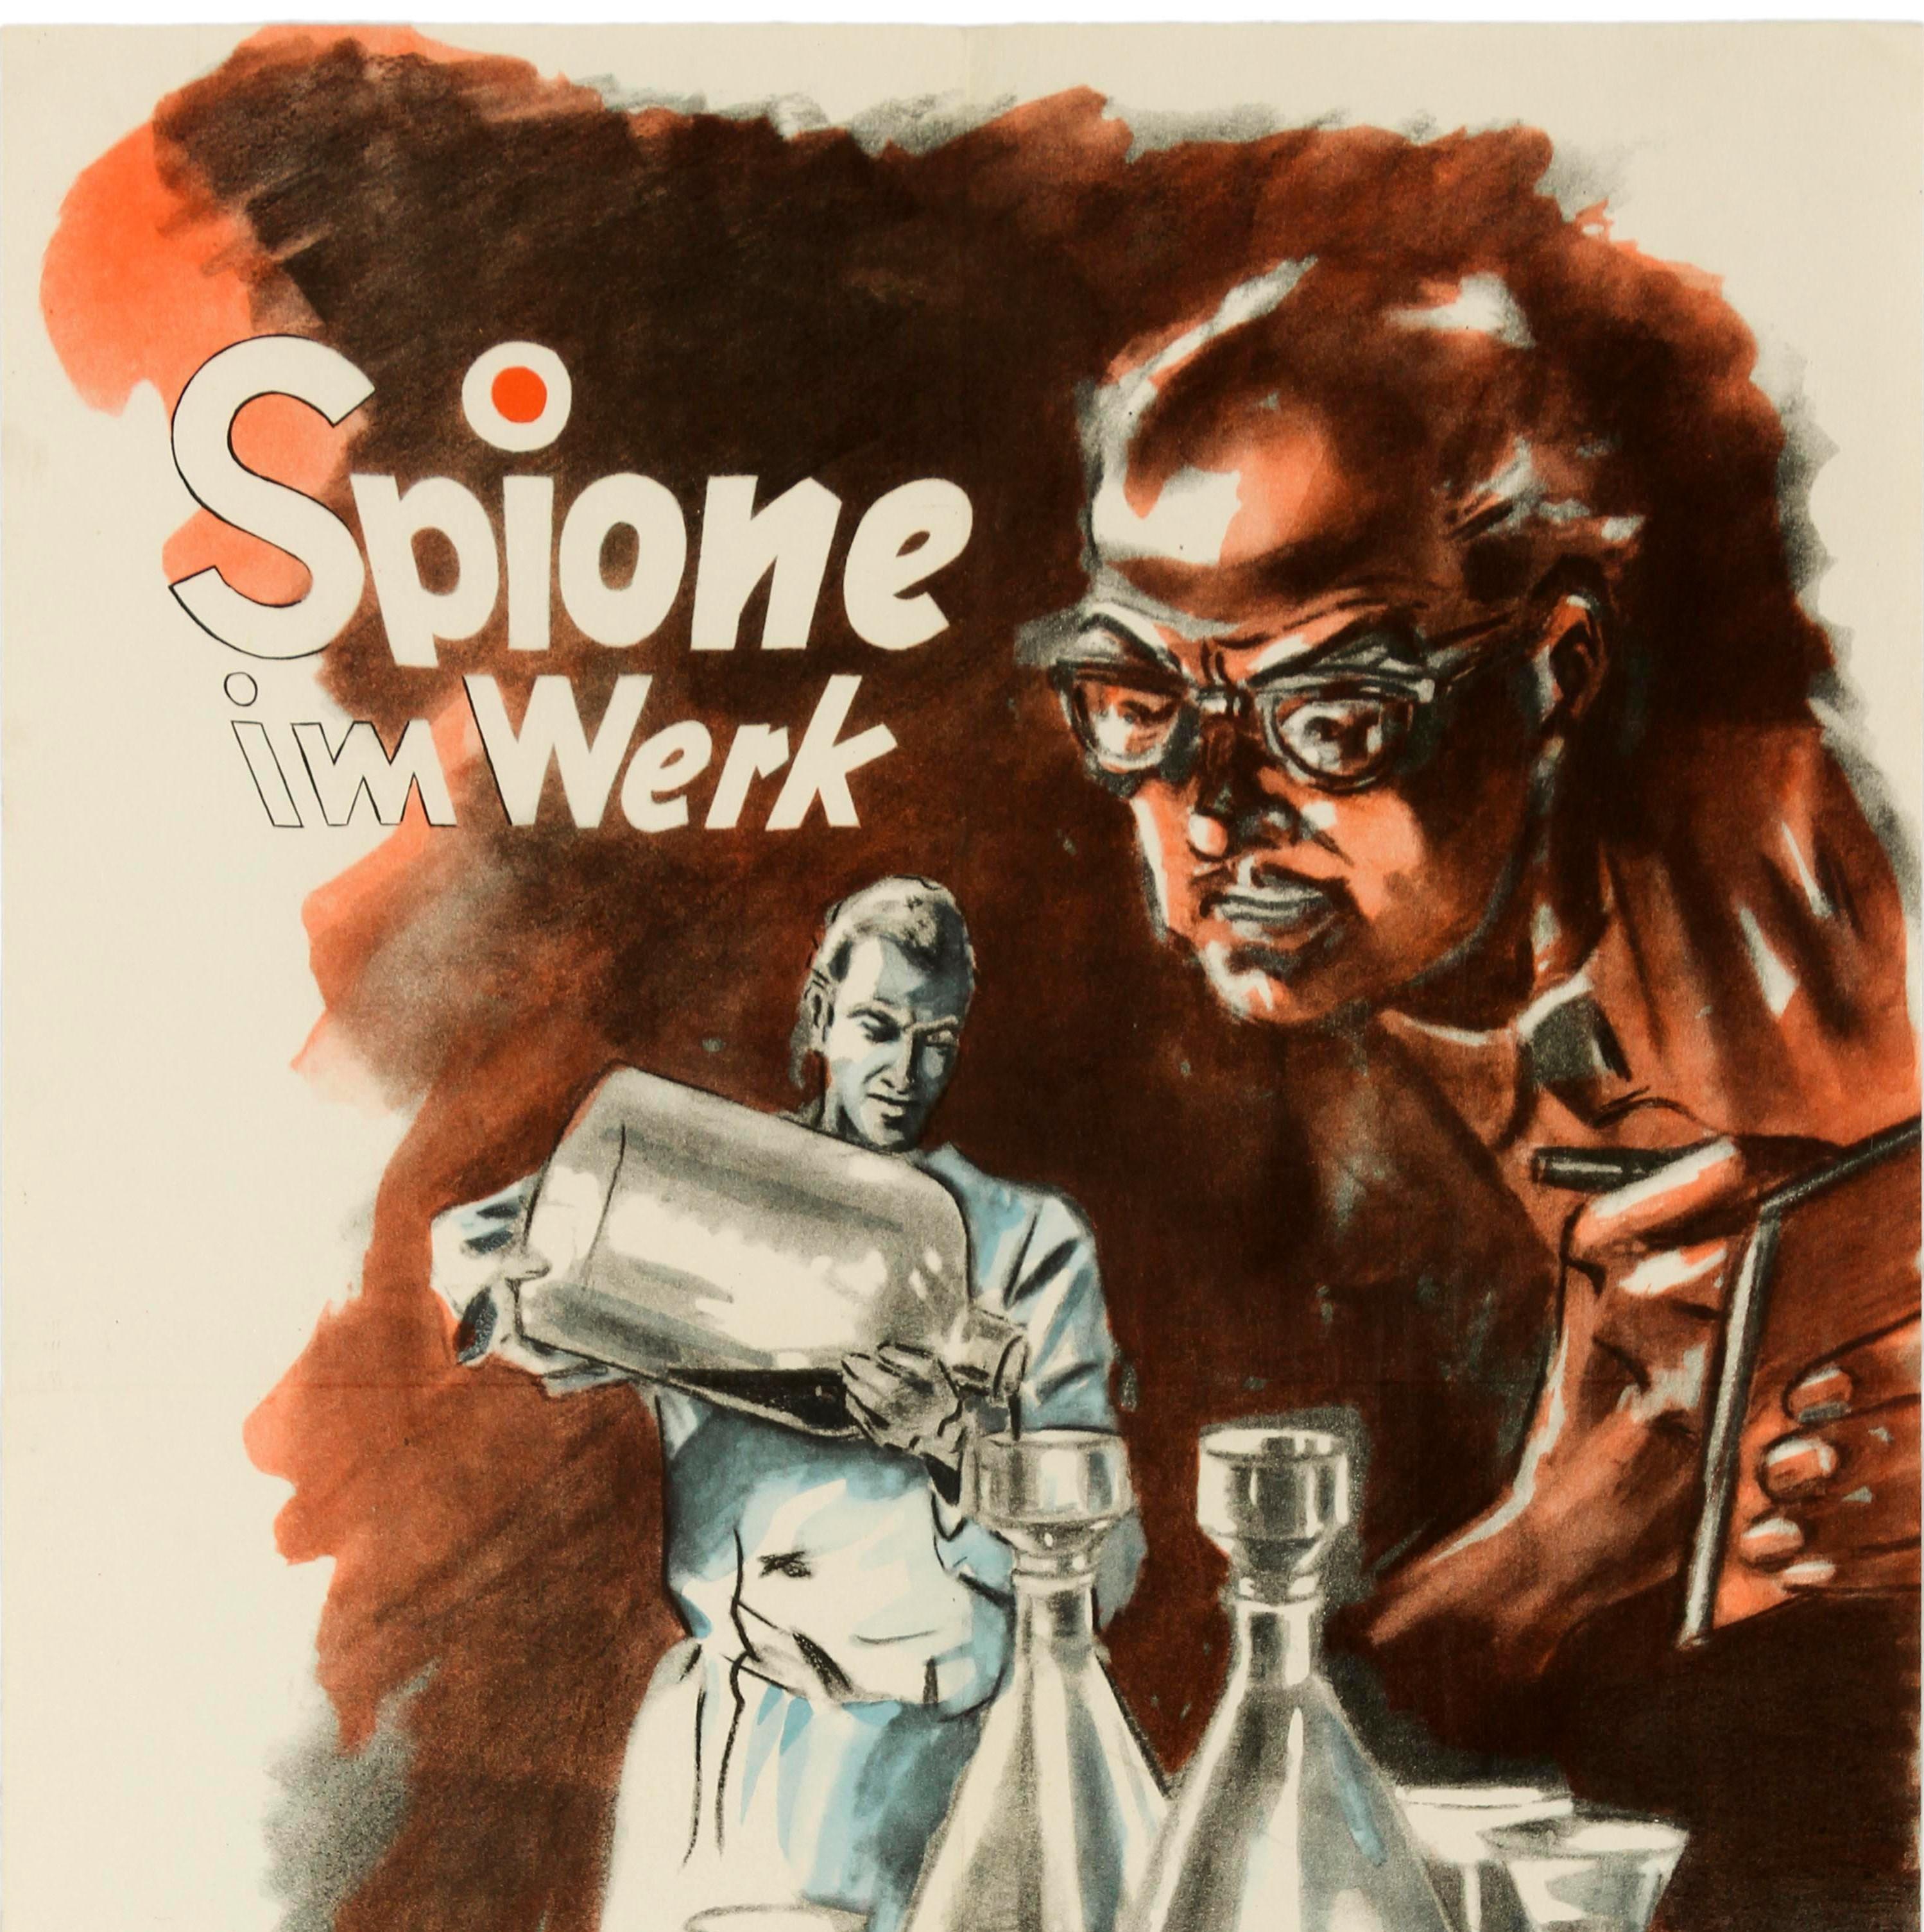 Original vintage German propaganda poster issued by the VFF Volksbund fur Frieden und Freiheit / People's Commission for Peace and Freedom featuring a communist spy looking over a science laboratory worker from the background, making notes as the